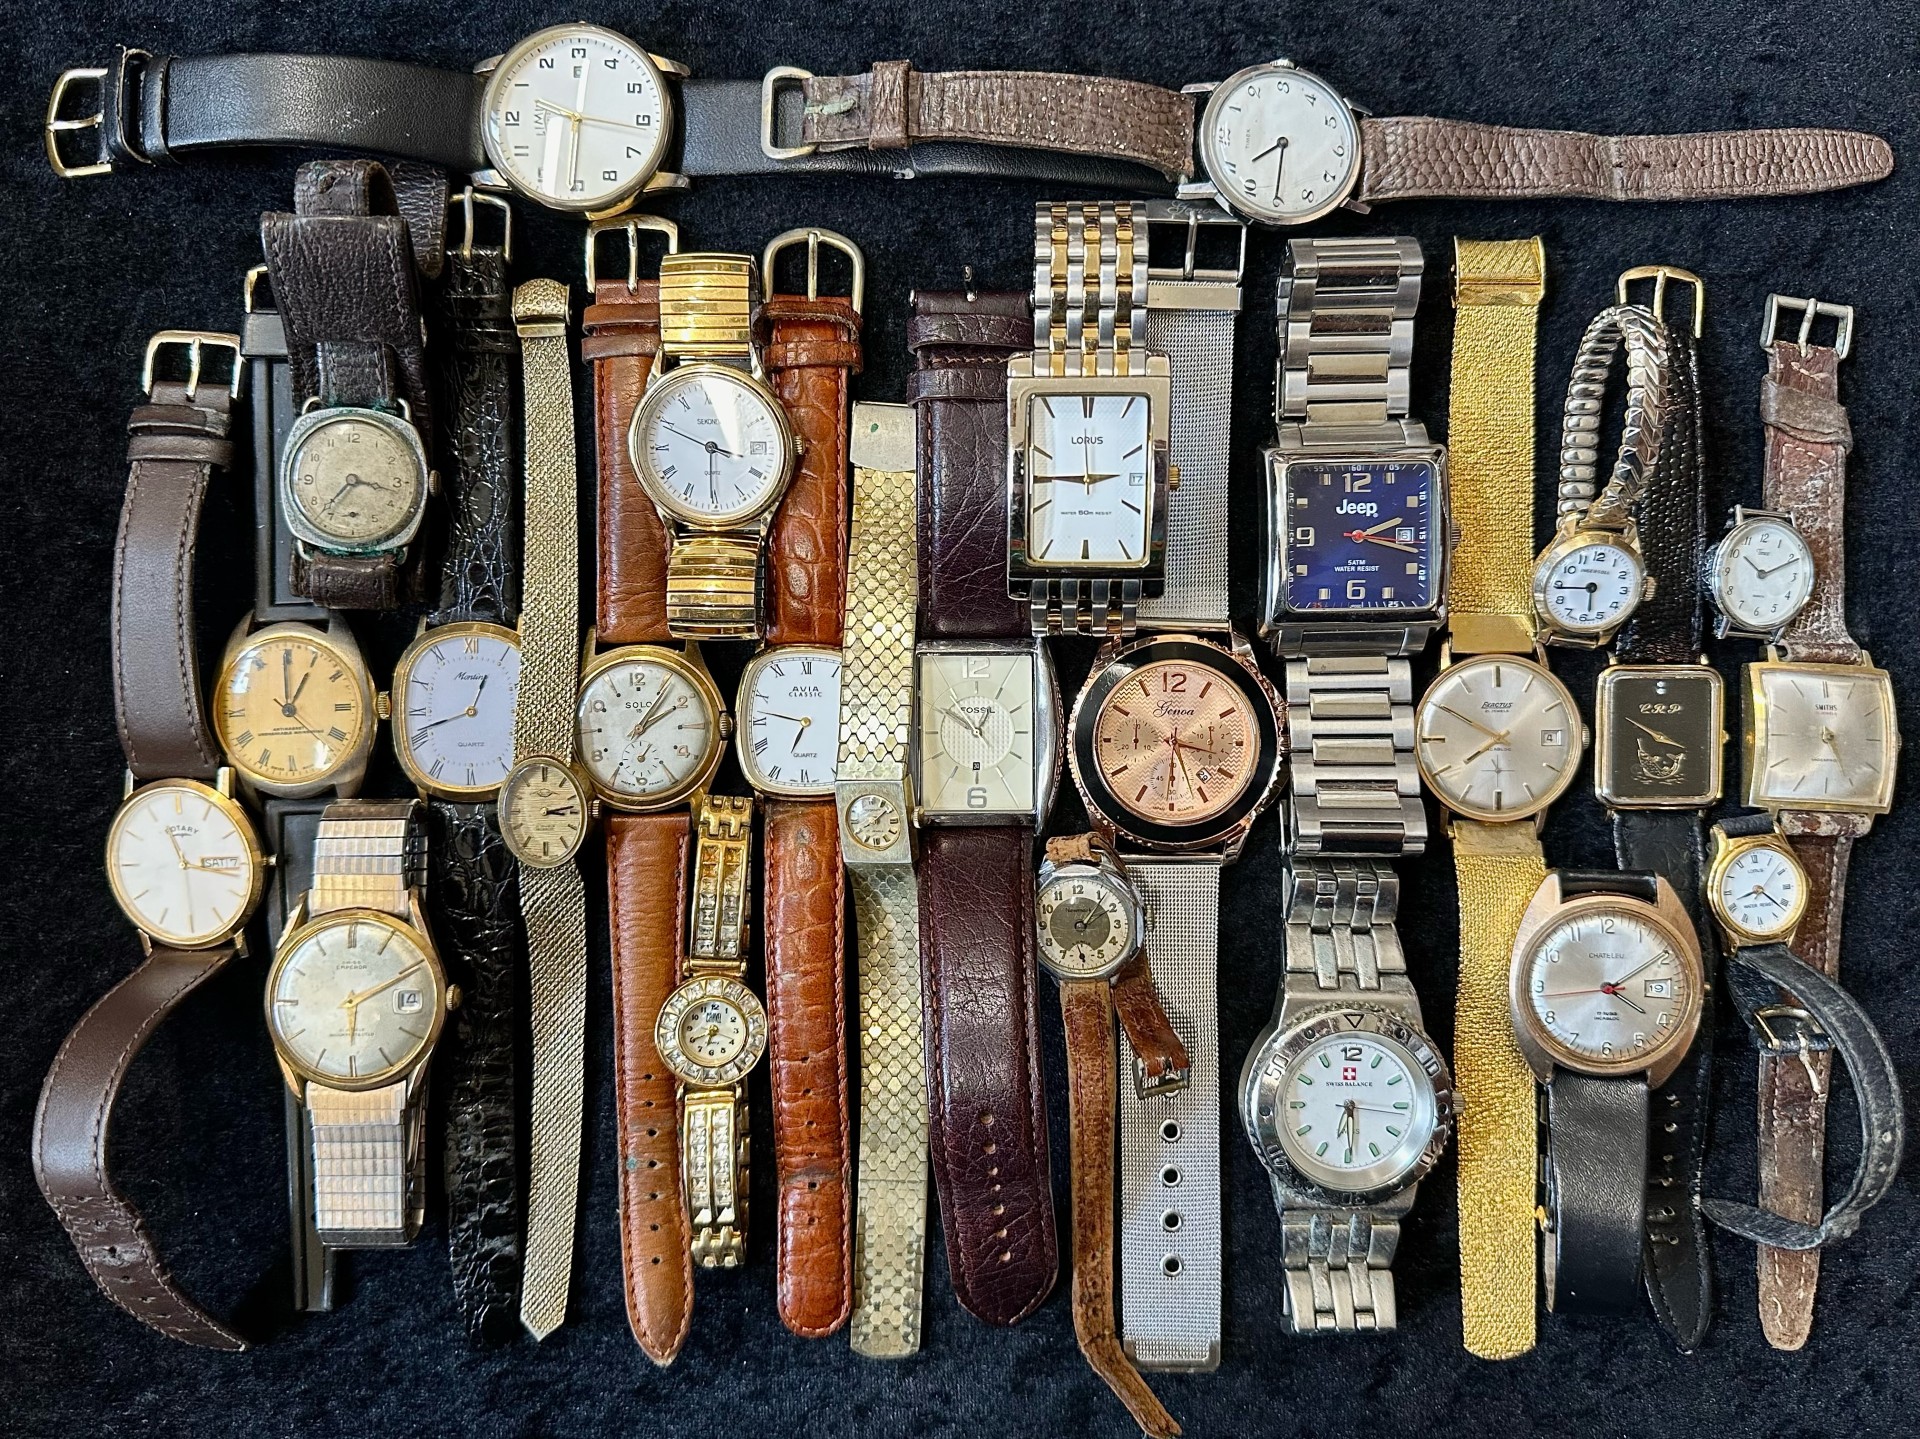 Collection of Ladies & Gentleman's Wristwatches, leather and bracelet straps, makes include Timex,